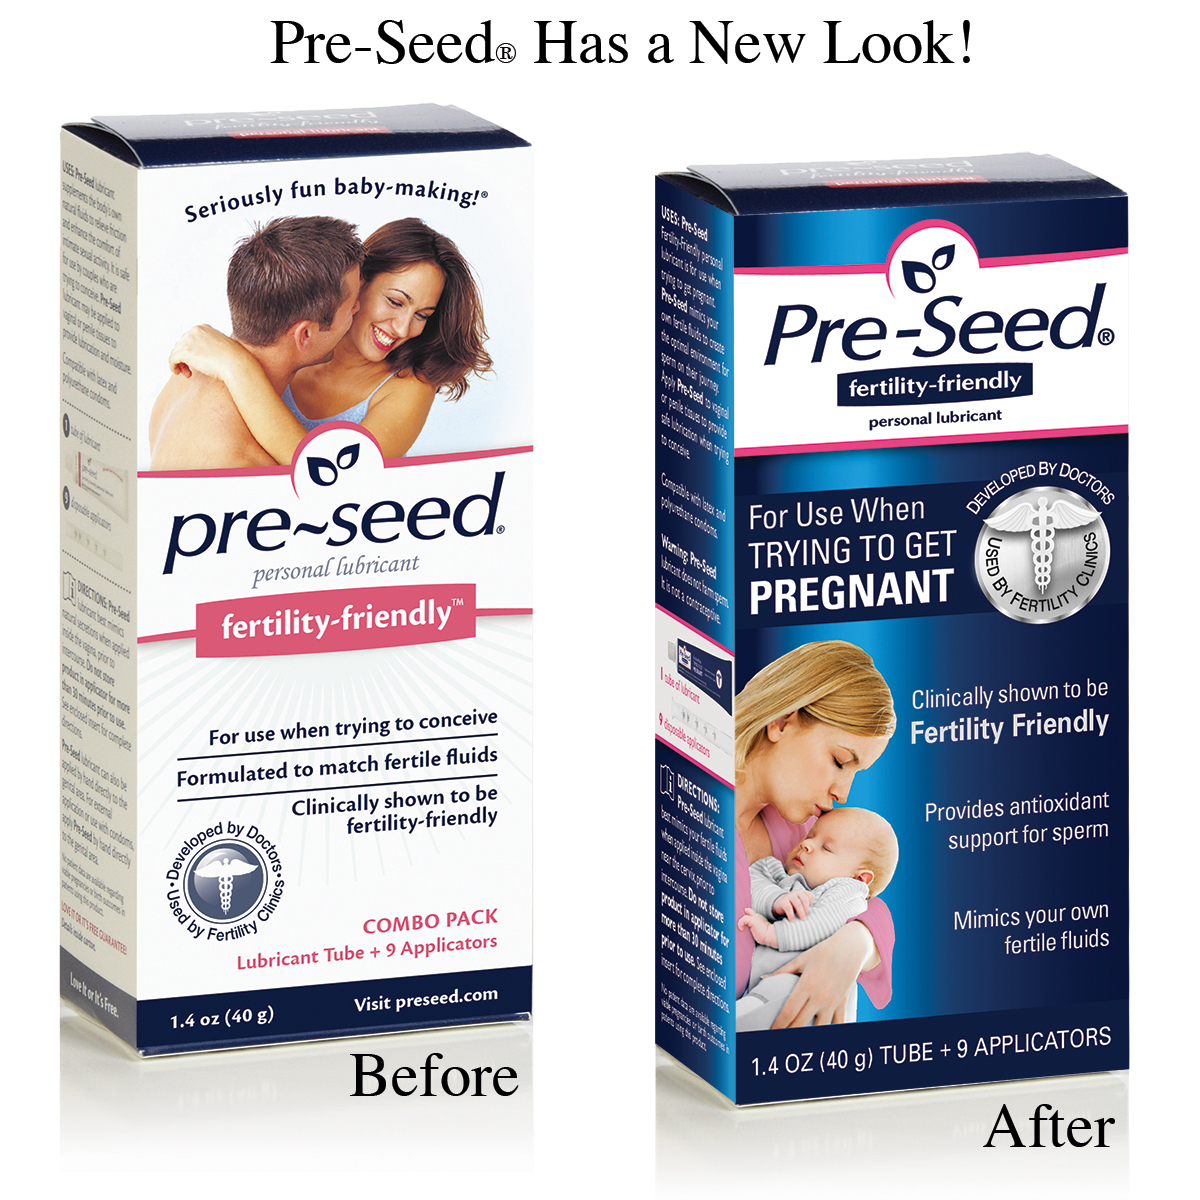 How Does Pre-Seed Work? Here's What You Should Know